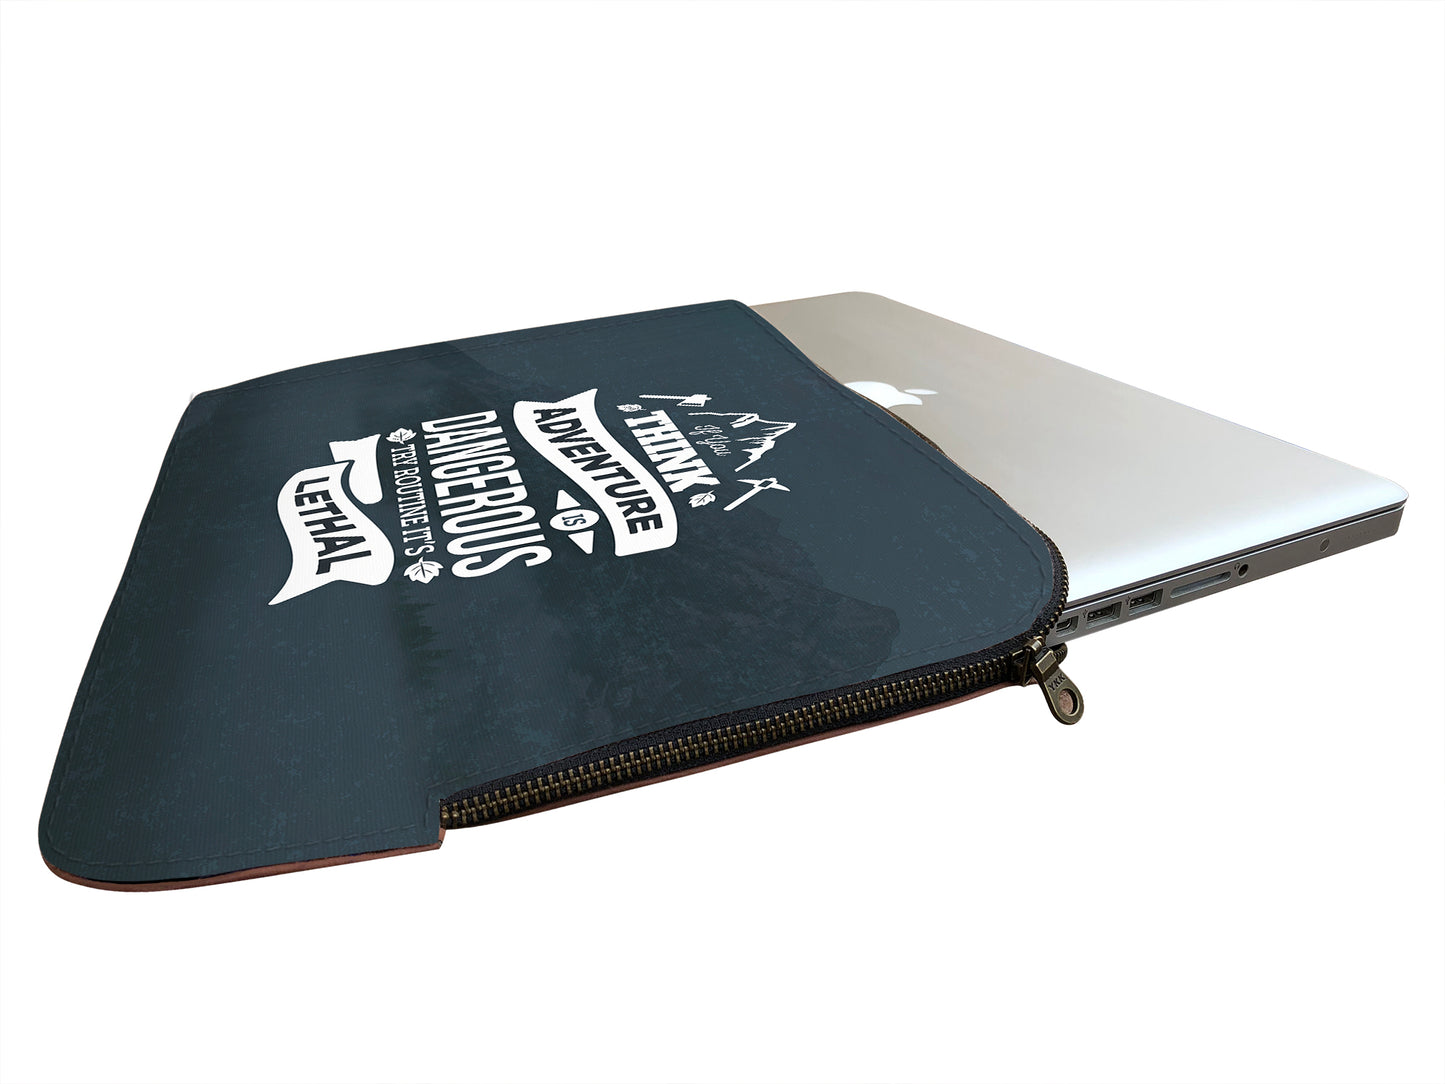 Routine Is Lethal Laptop Sleeve